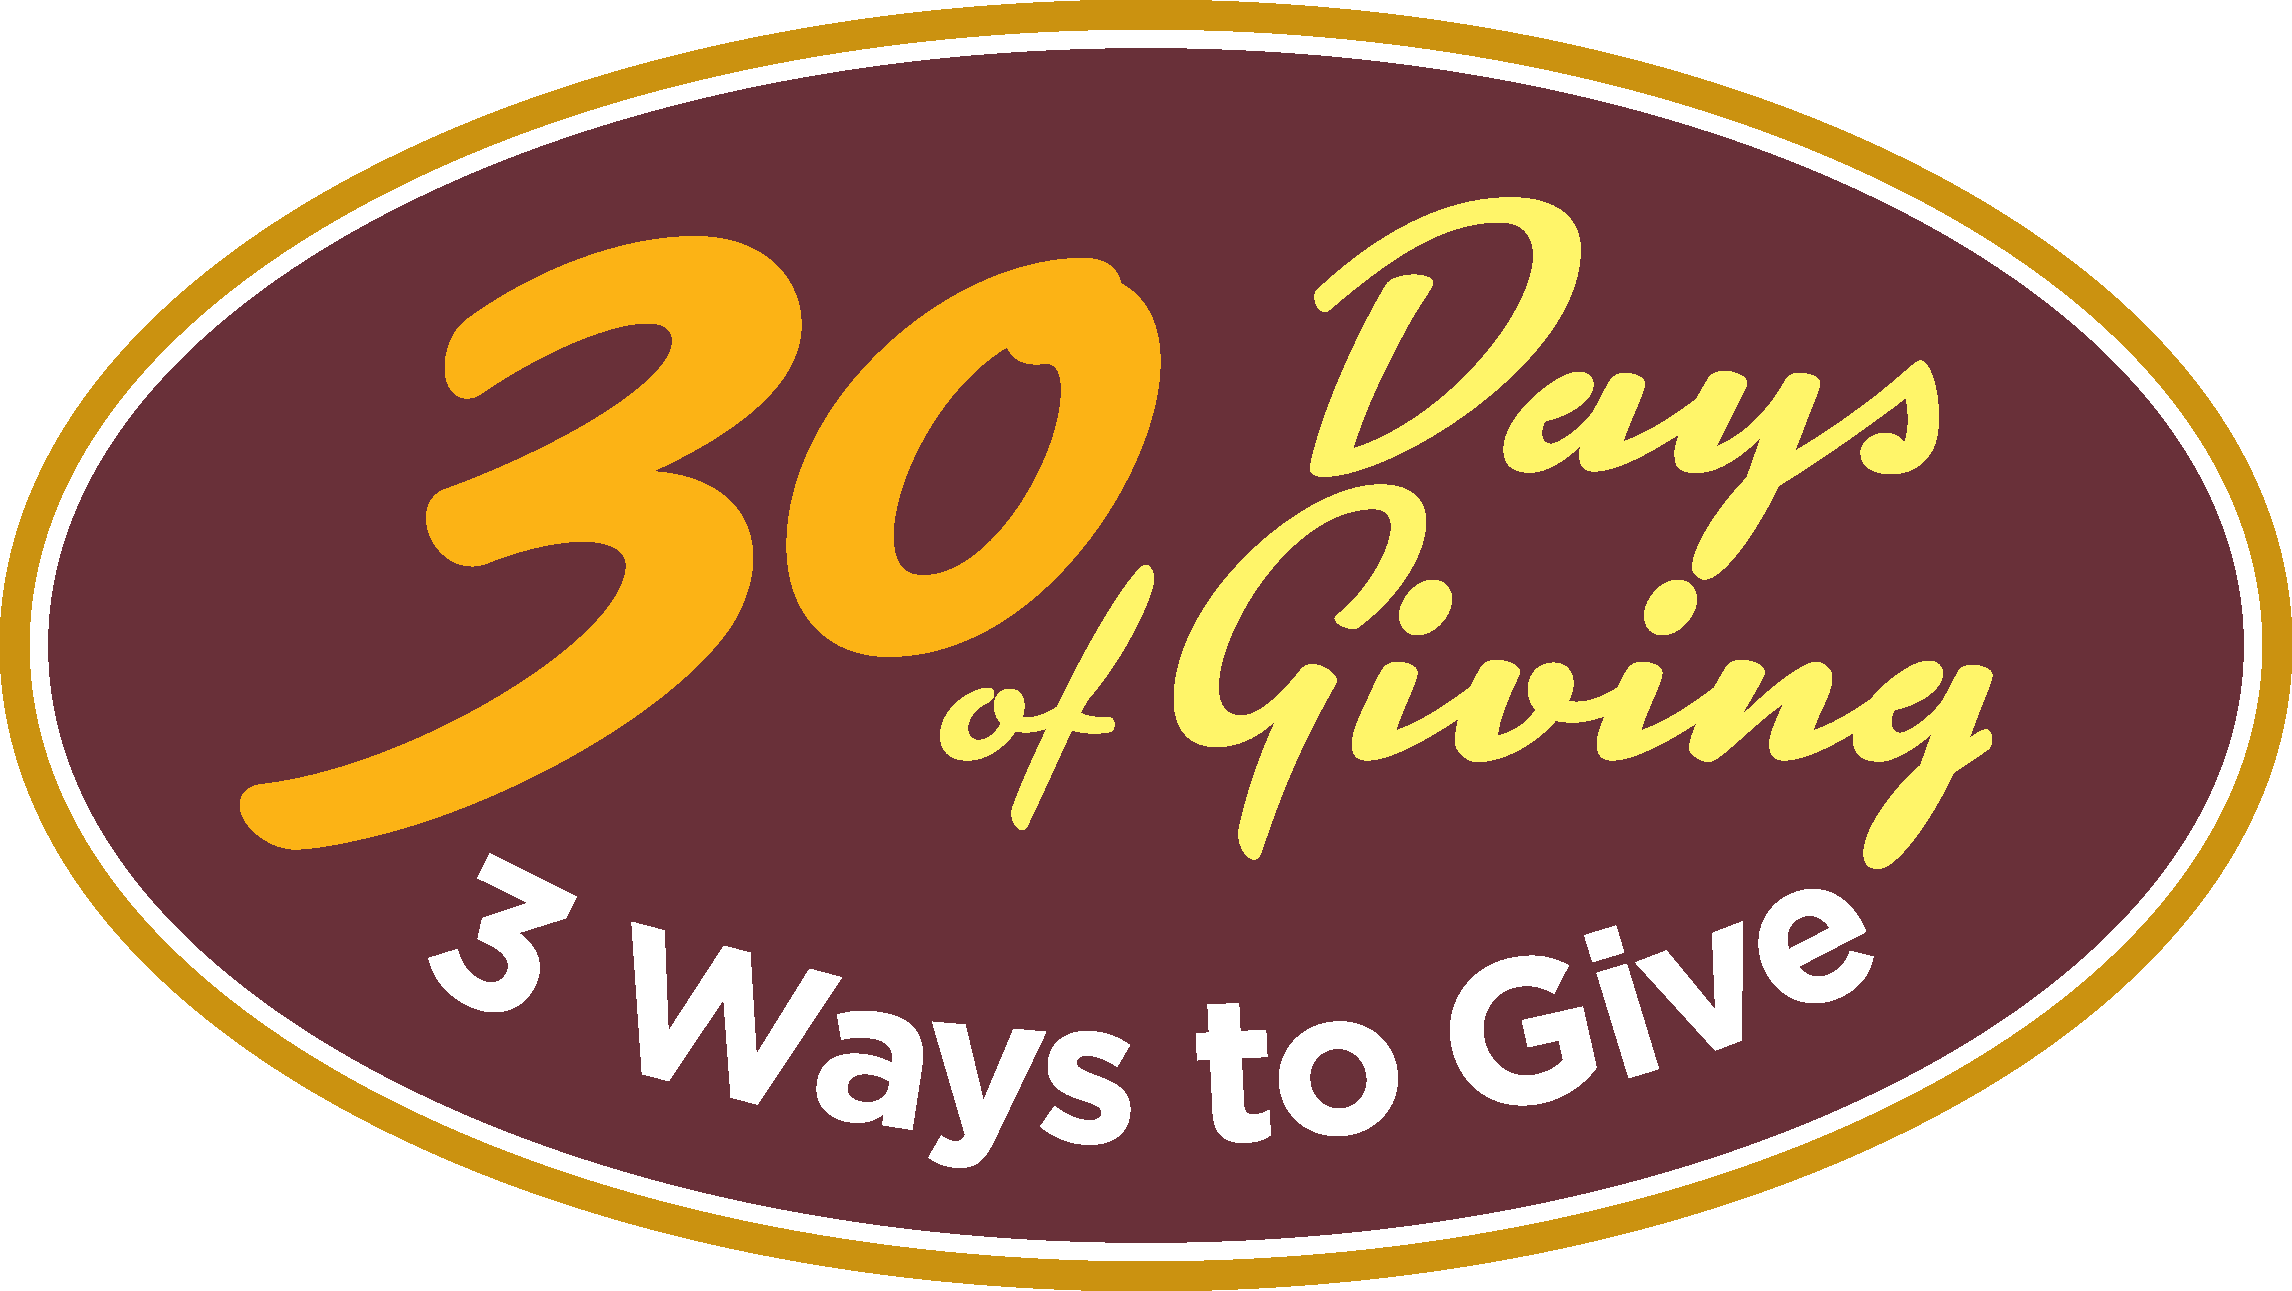 Revised Logo - 30 days give 3 ways to give - revised logo - Black AIDS Institute